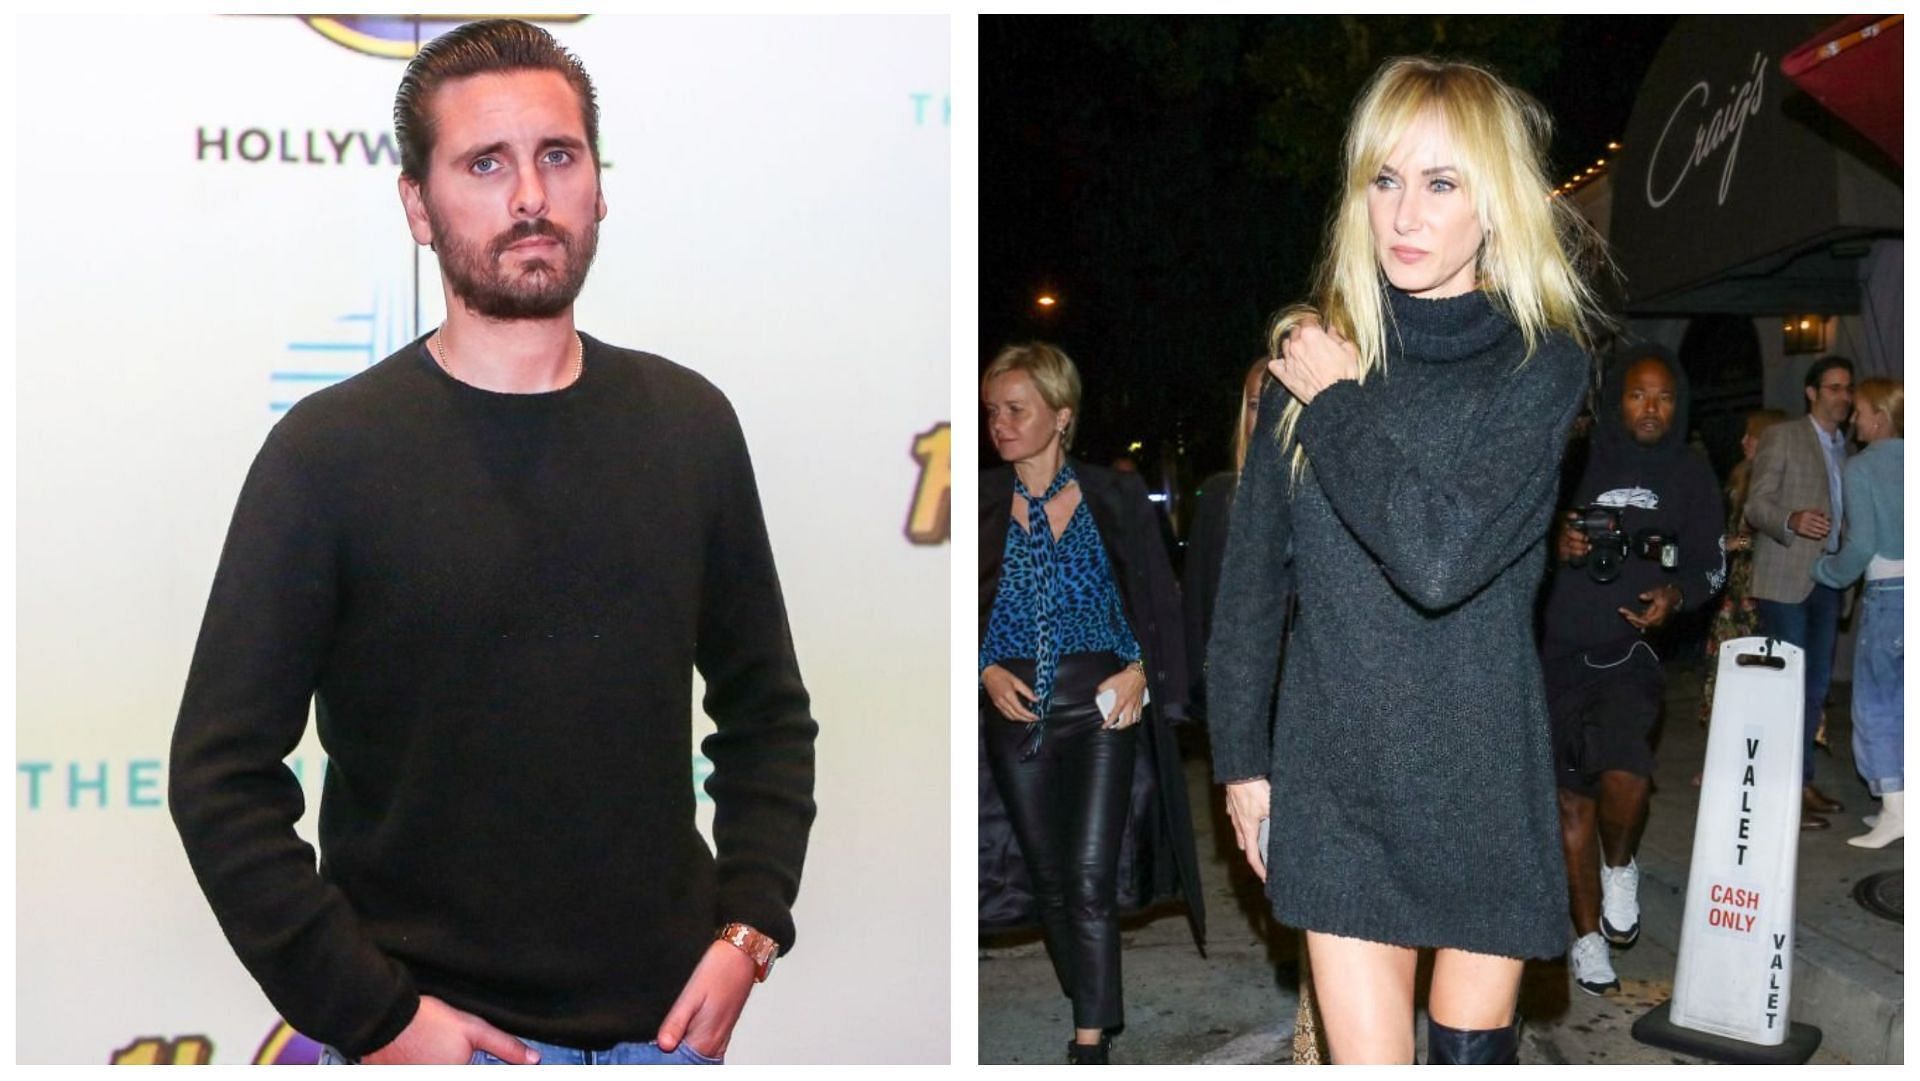 Scott Disick and Kimberly Stewart are reportedly dating now (Images via Zak Bennett and Bauer-Griffin/Getty Images)